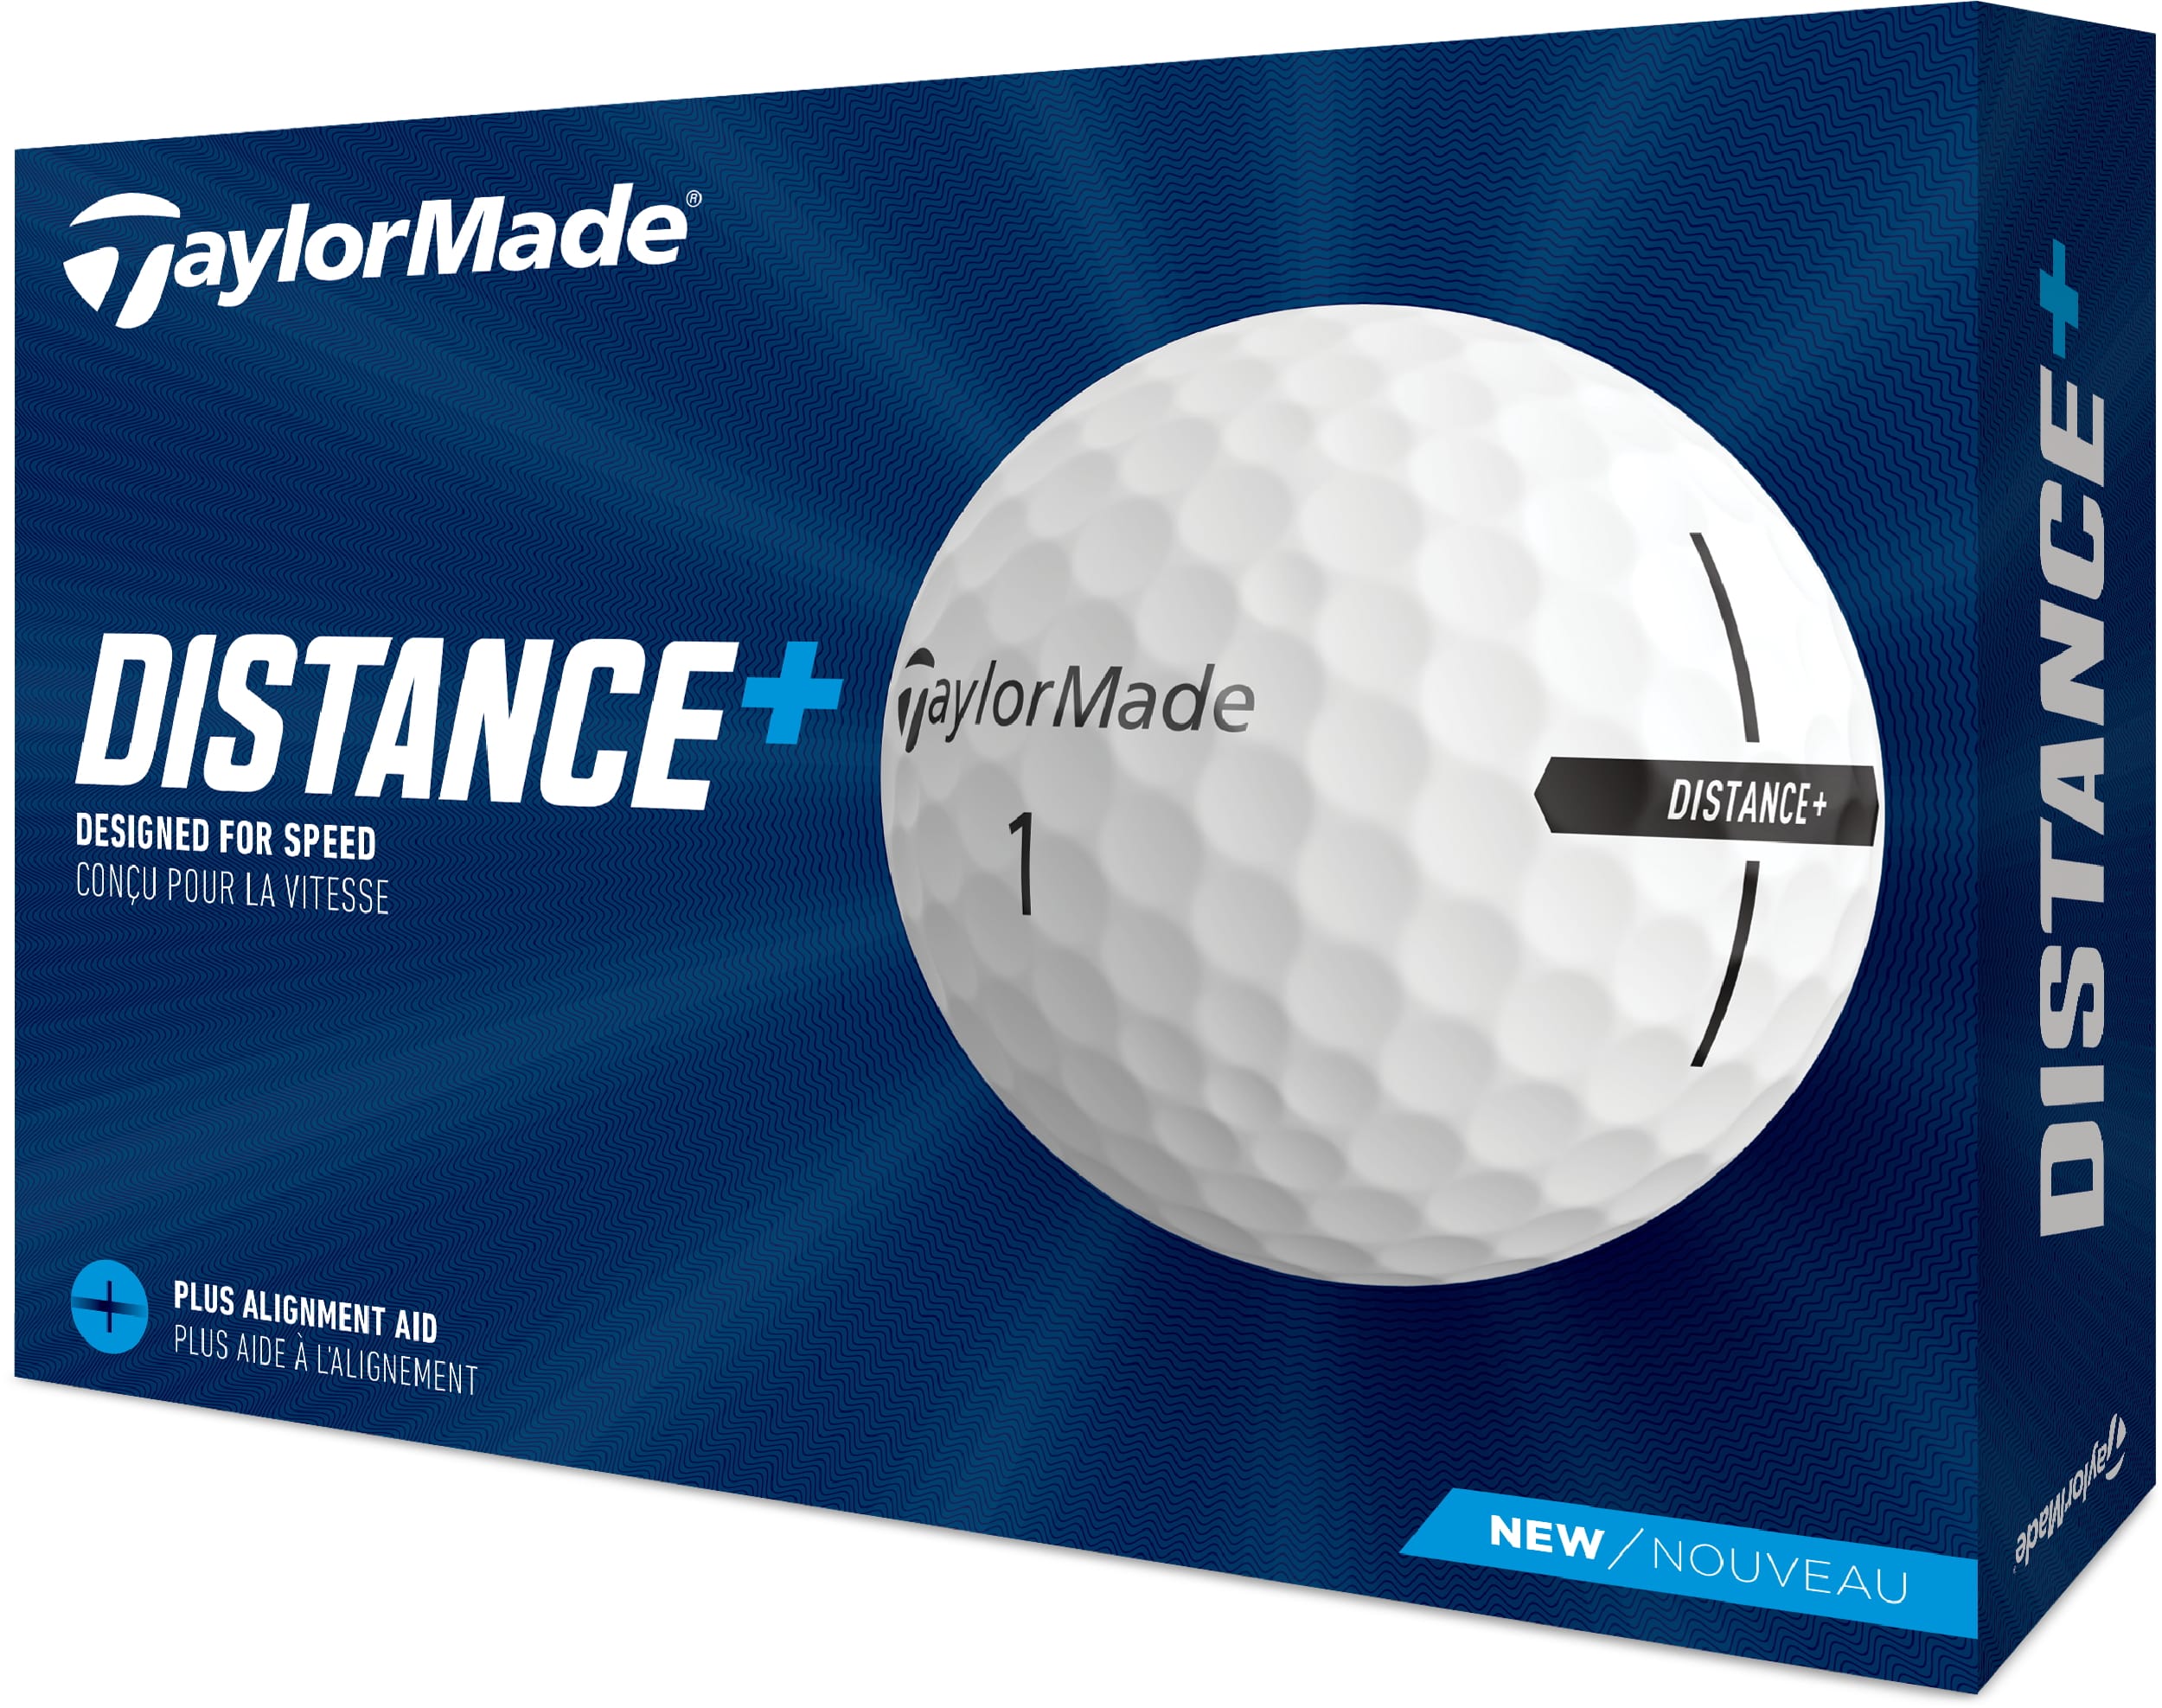 TaylorMade Distance+ Golfbälle, white